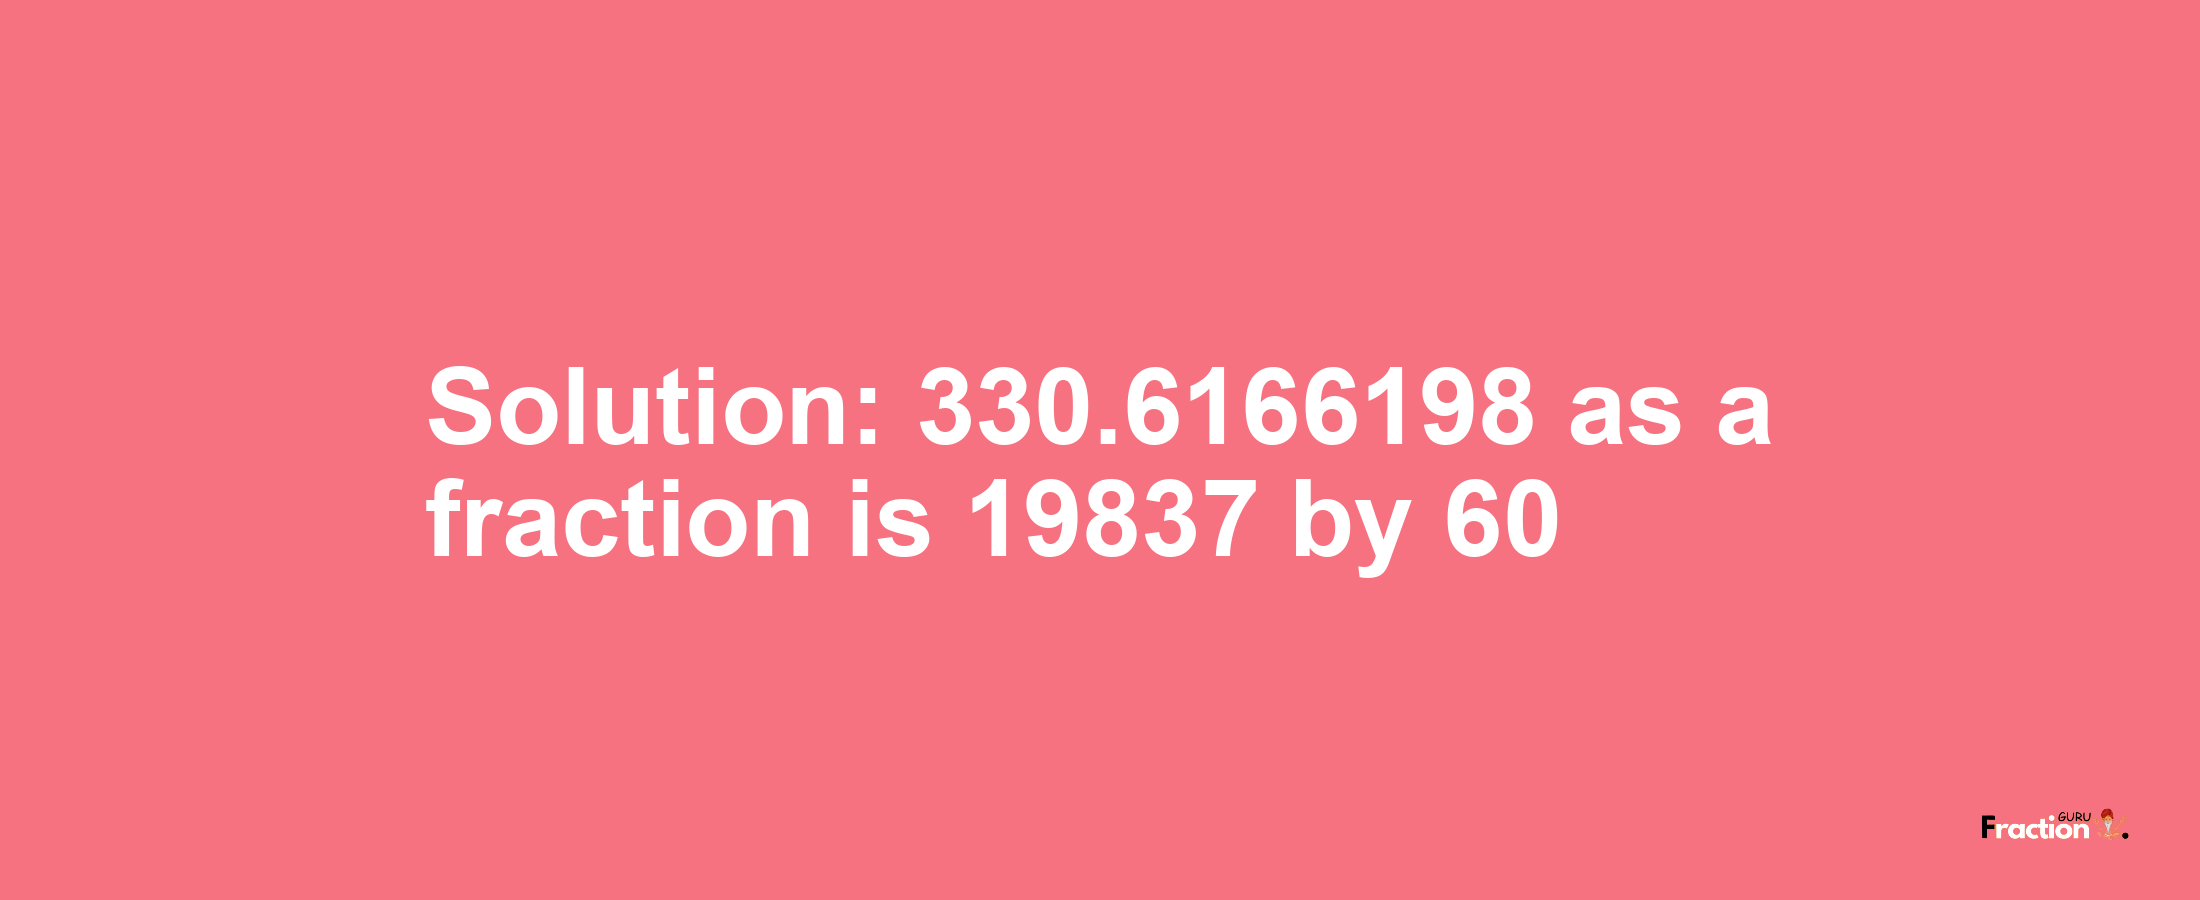 Solution:330.6166198 as a fraction is 19837/60